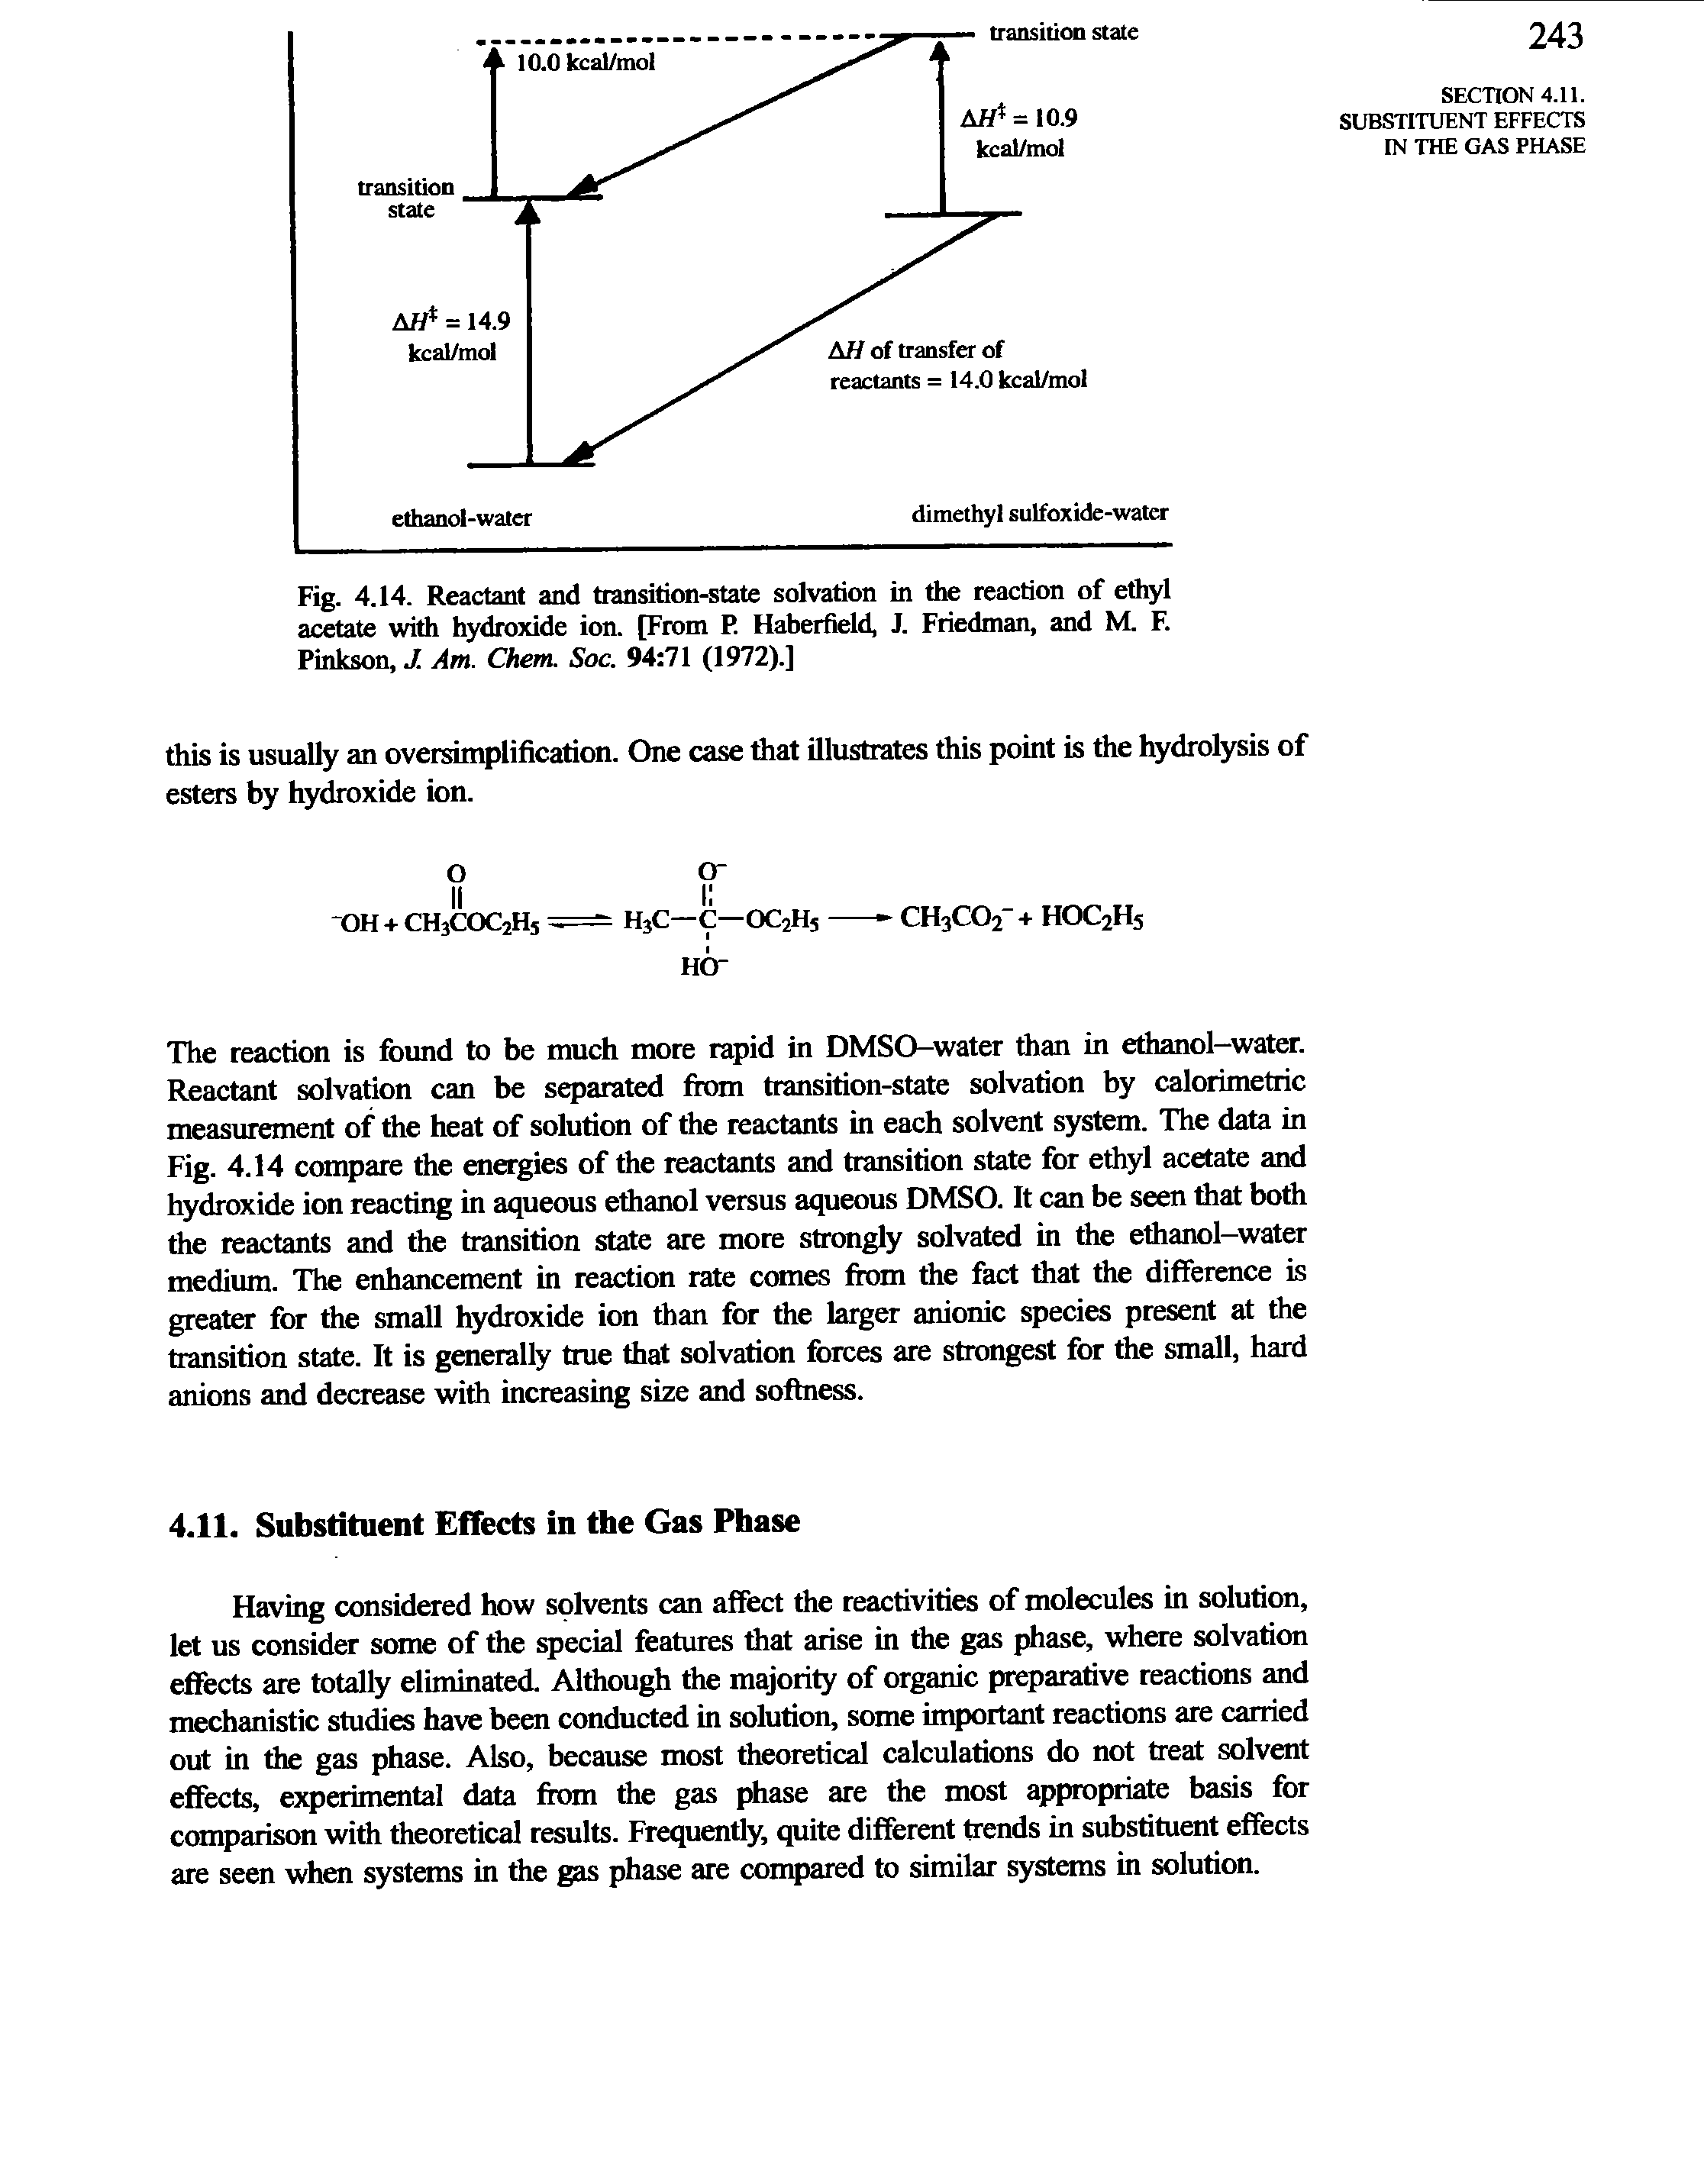 Fig. 4.14. Reactant and transition-state solvation in the reaction of ethyl acetate with hydroxide ion. [From P. Haberfield, J. Friedman, and M. F. Pinkson, J. Am. Chem. Soc. 94 71 (1972).]...